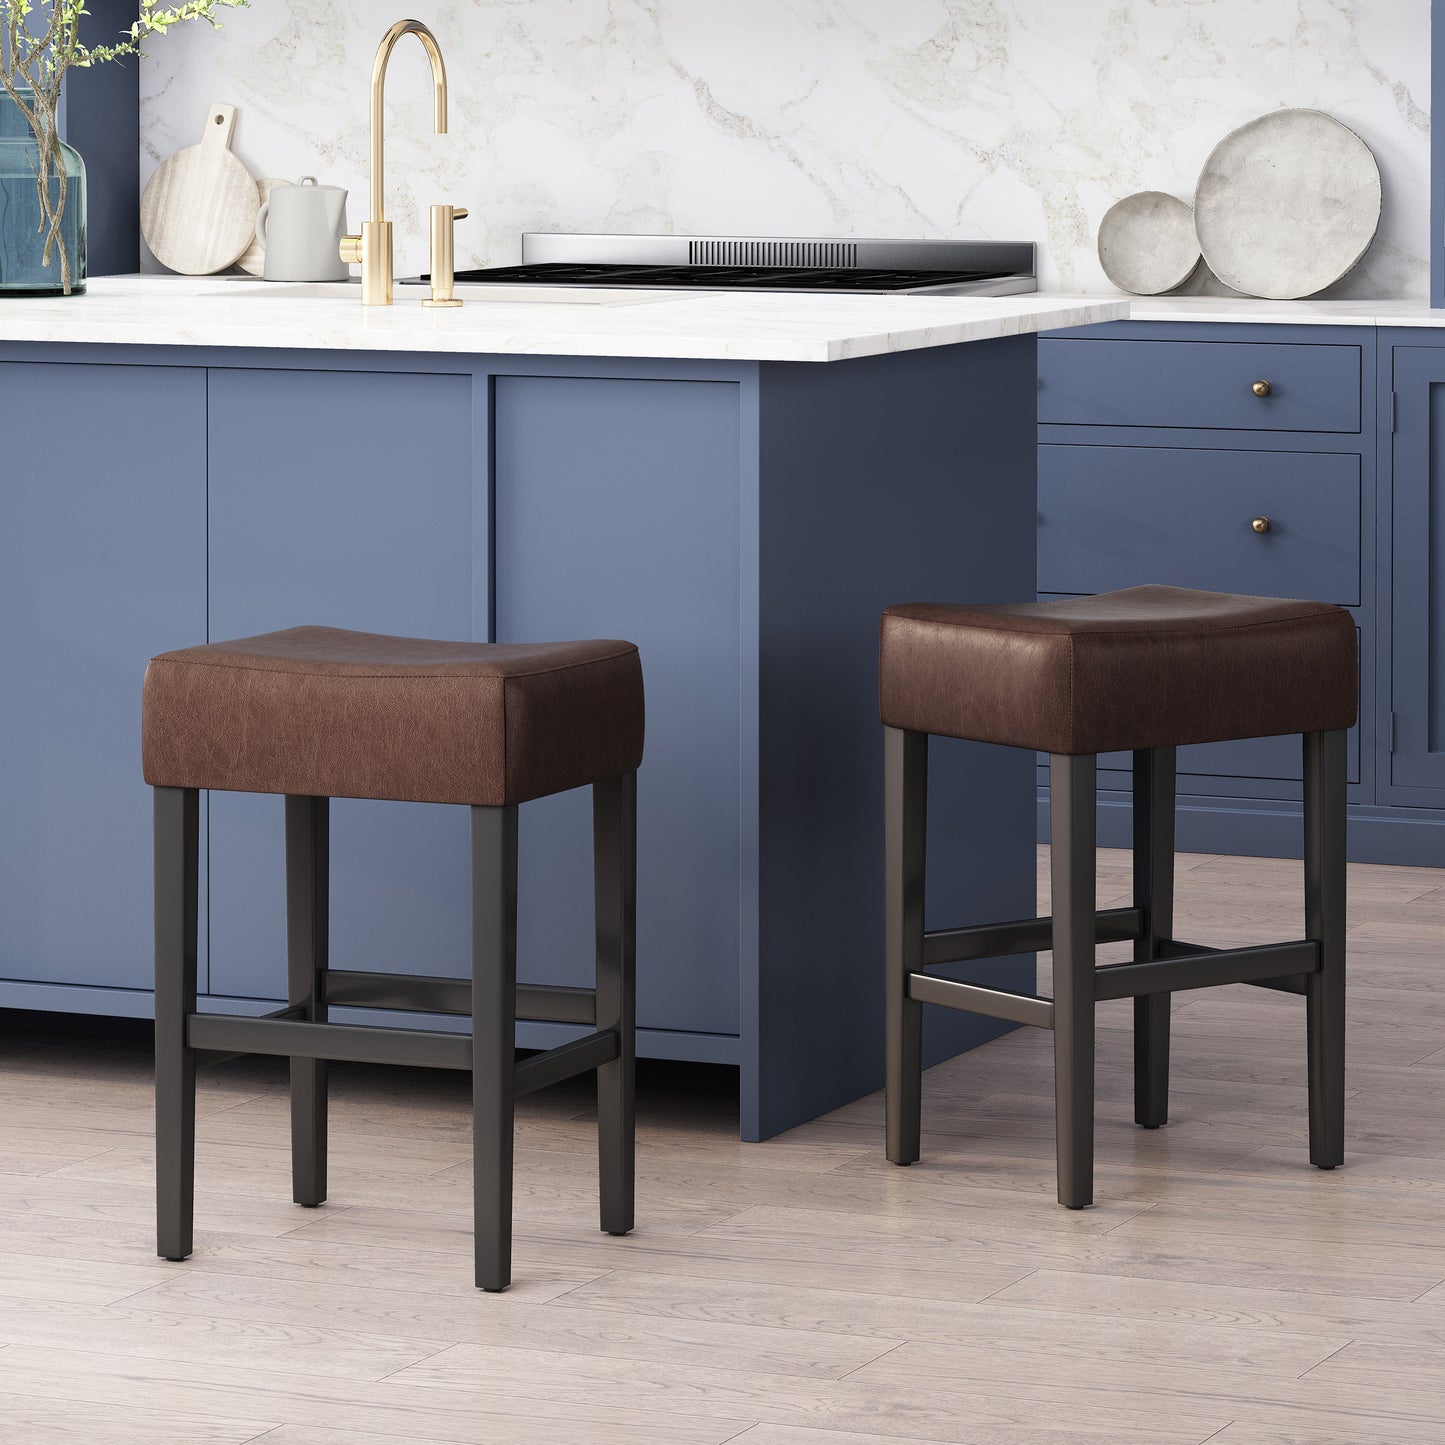 Duff 26-Inch Backless Leather Counter Stools (Set of 2)